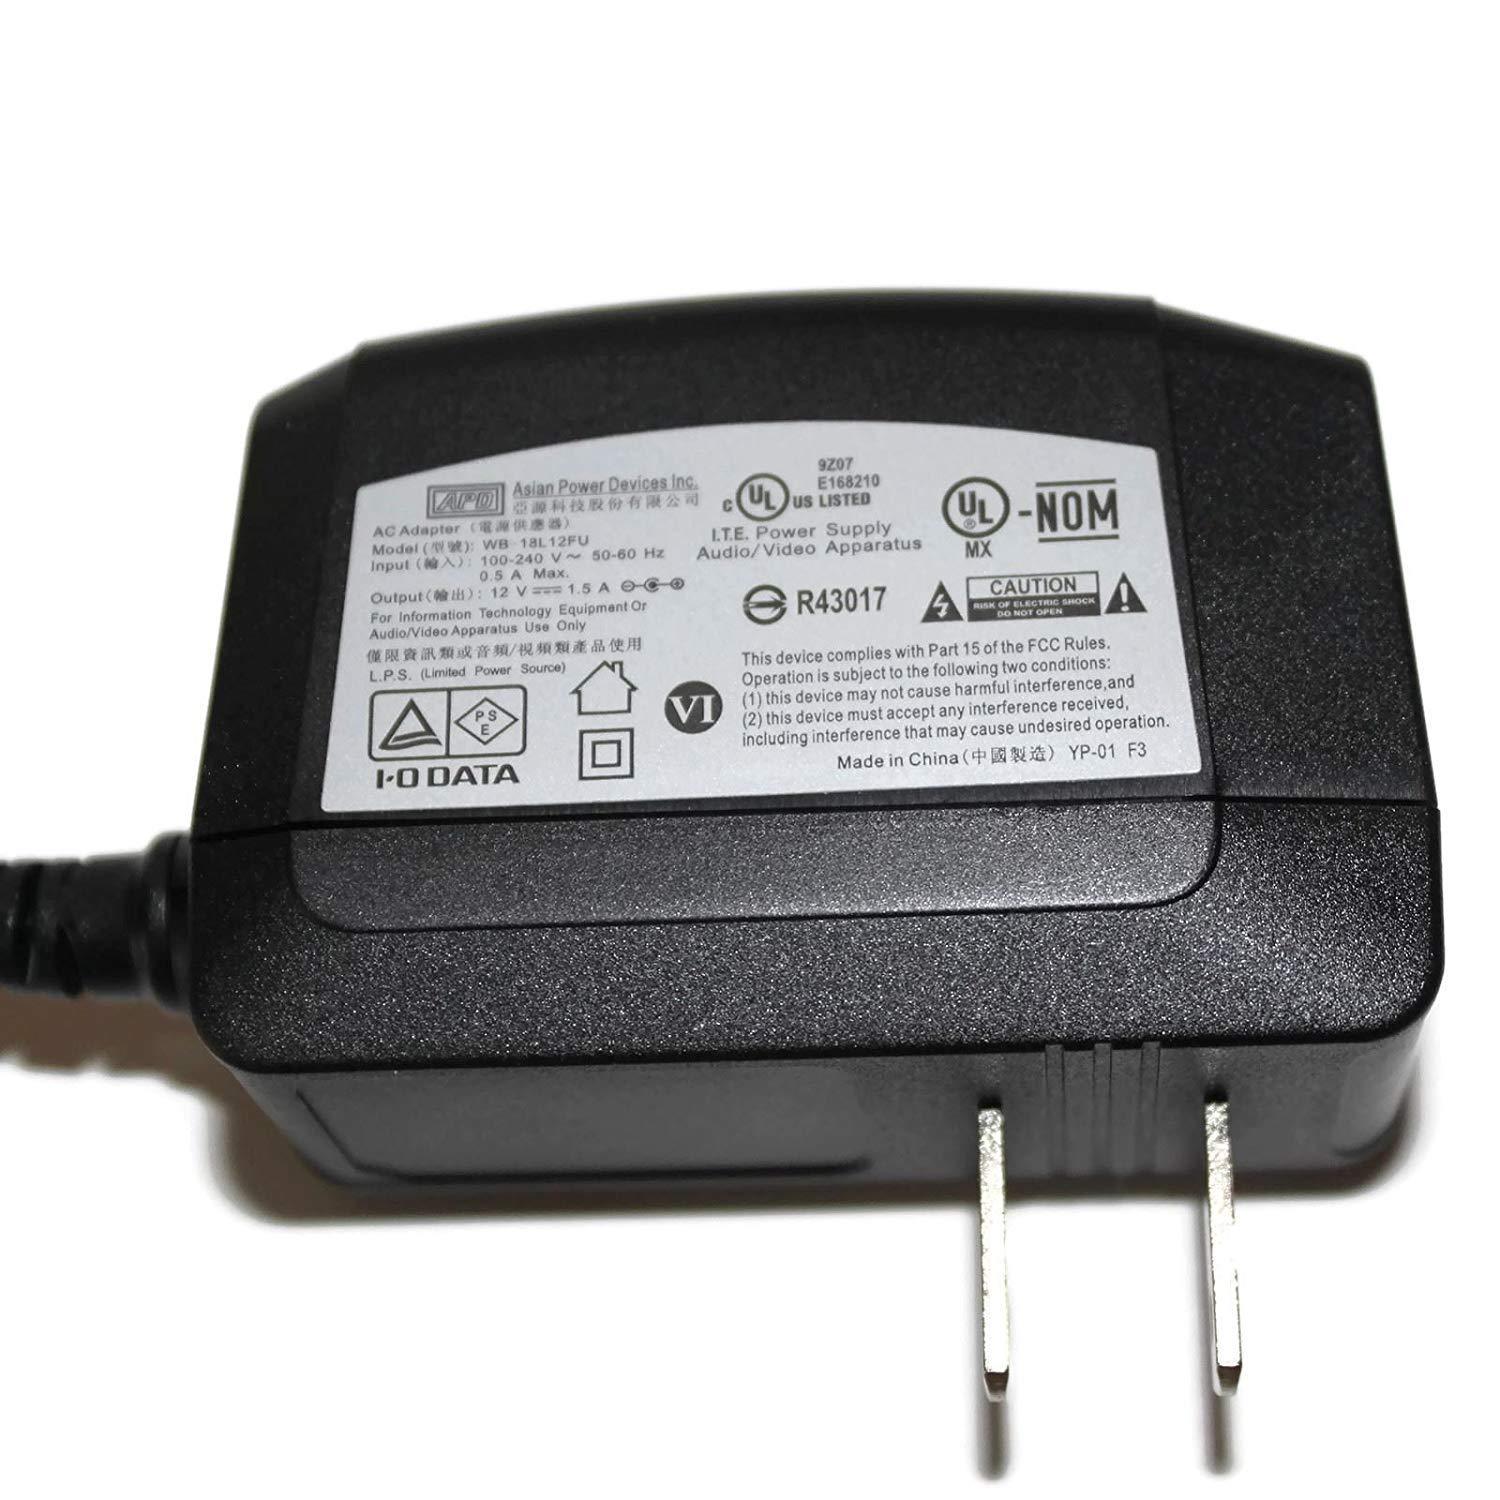 Genuine APD 12V 1.5A WB-18L12FU AC Adapter for WD/Seagate HDD Specification: Brand:APD MODEL:WB-